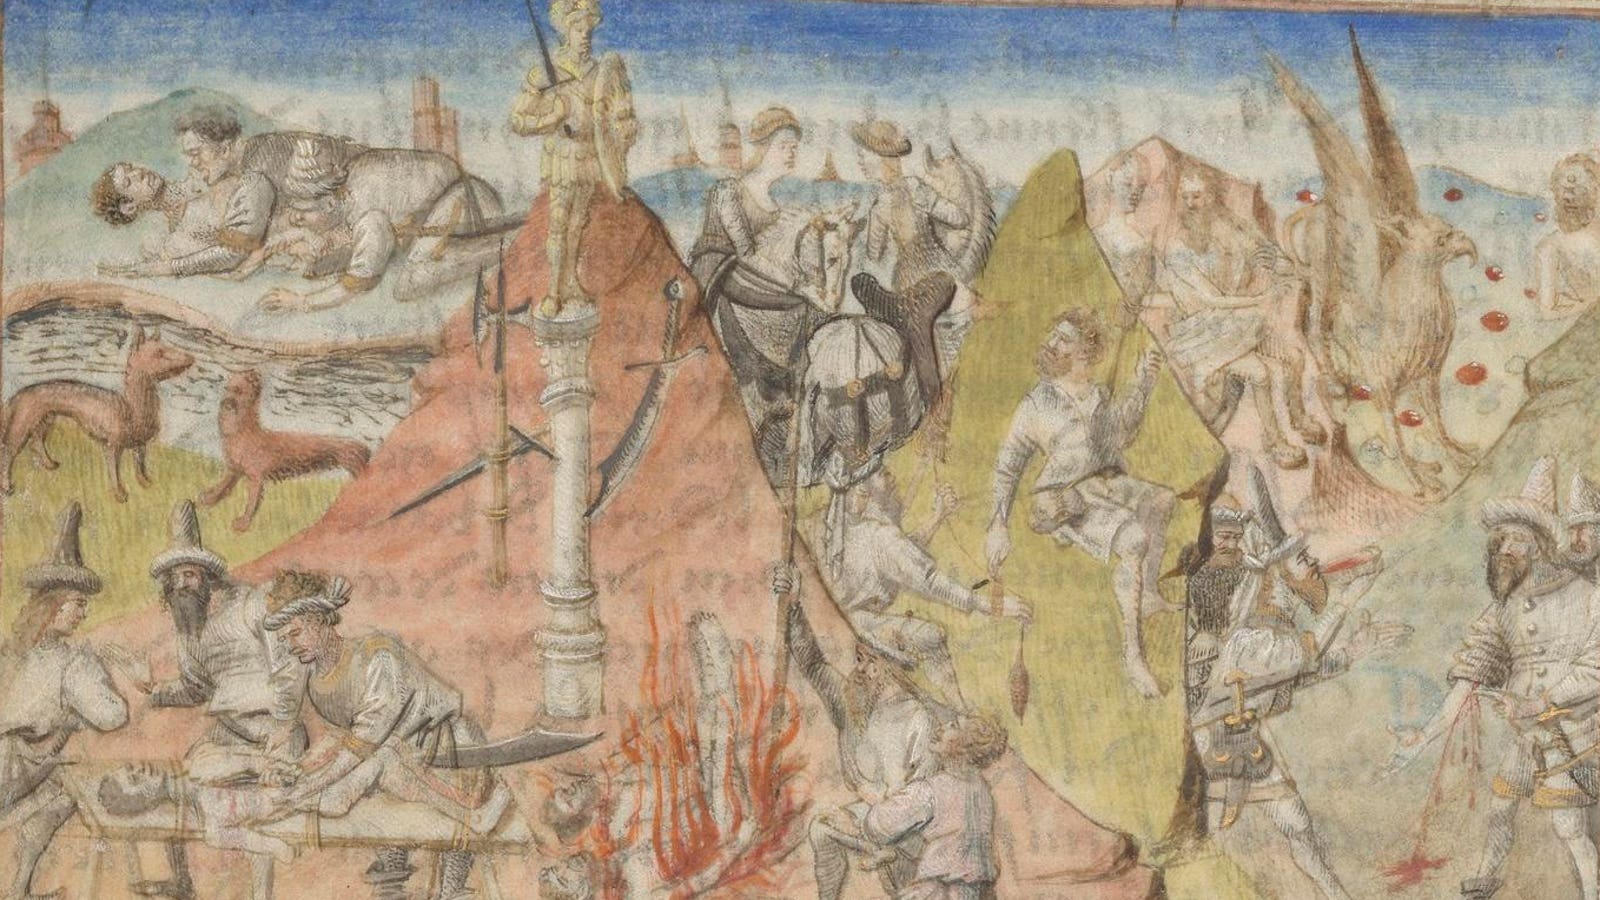 Better Than Lonely Planet? The Medieval Book Of Marvels Is The Ultimate Guide To Our Crazy World